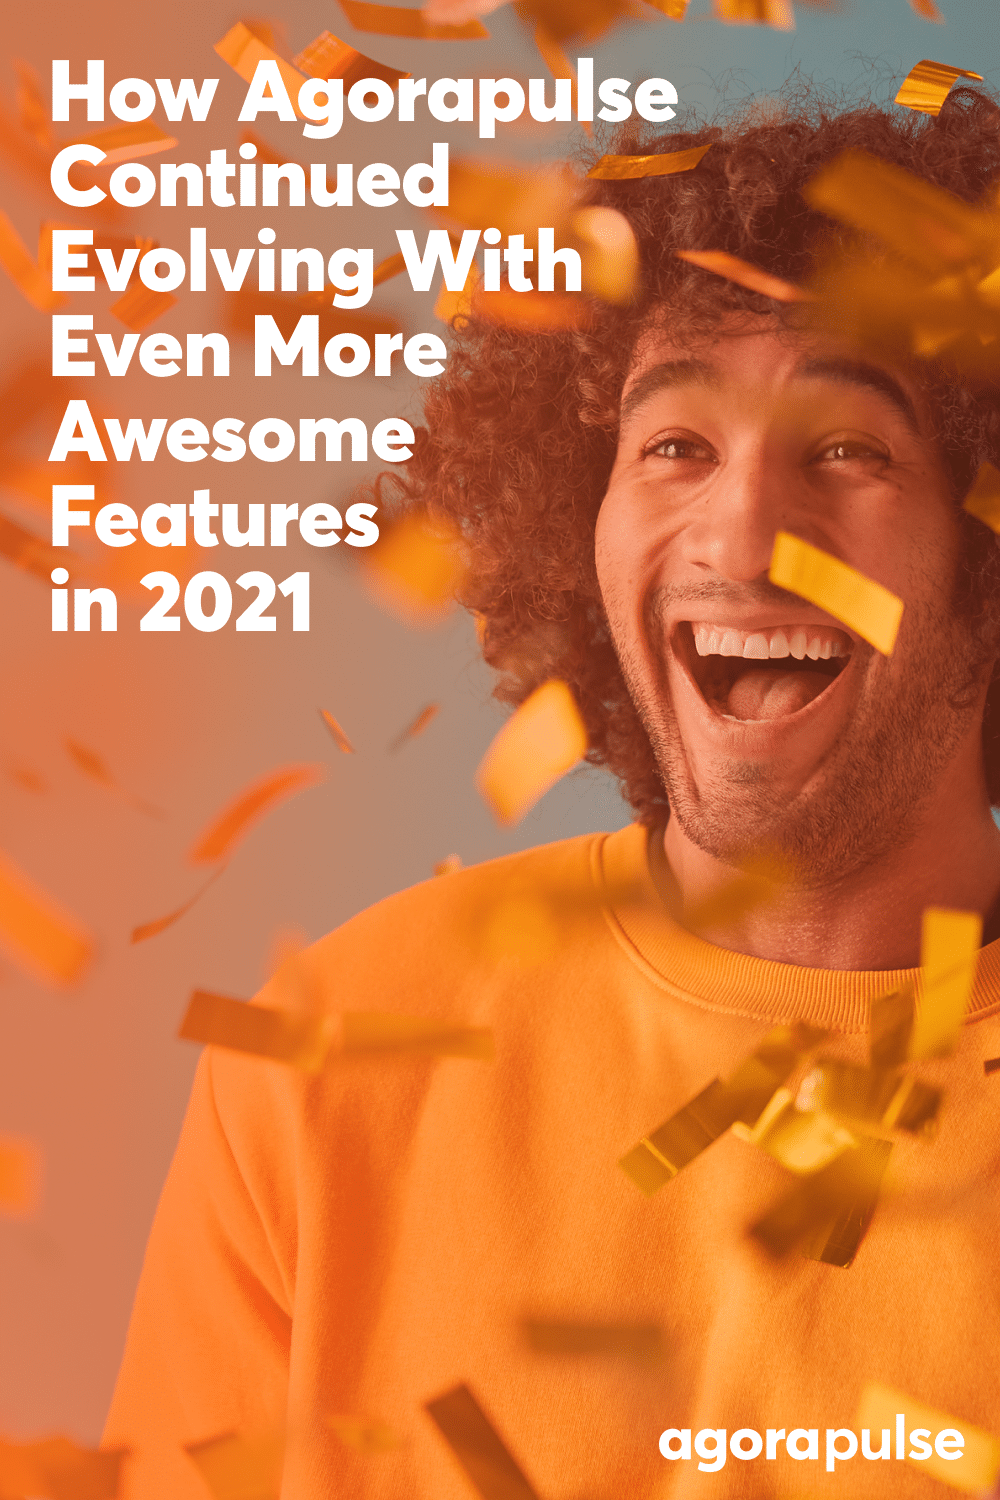 How Agorapulse Continued Evolving With Even More Awesome Features in 2021 [Infographic]